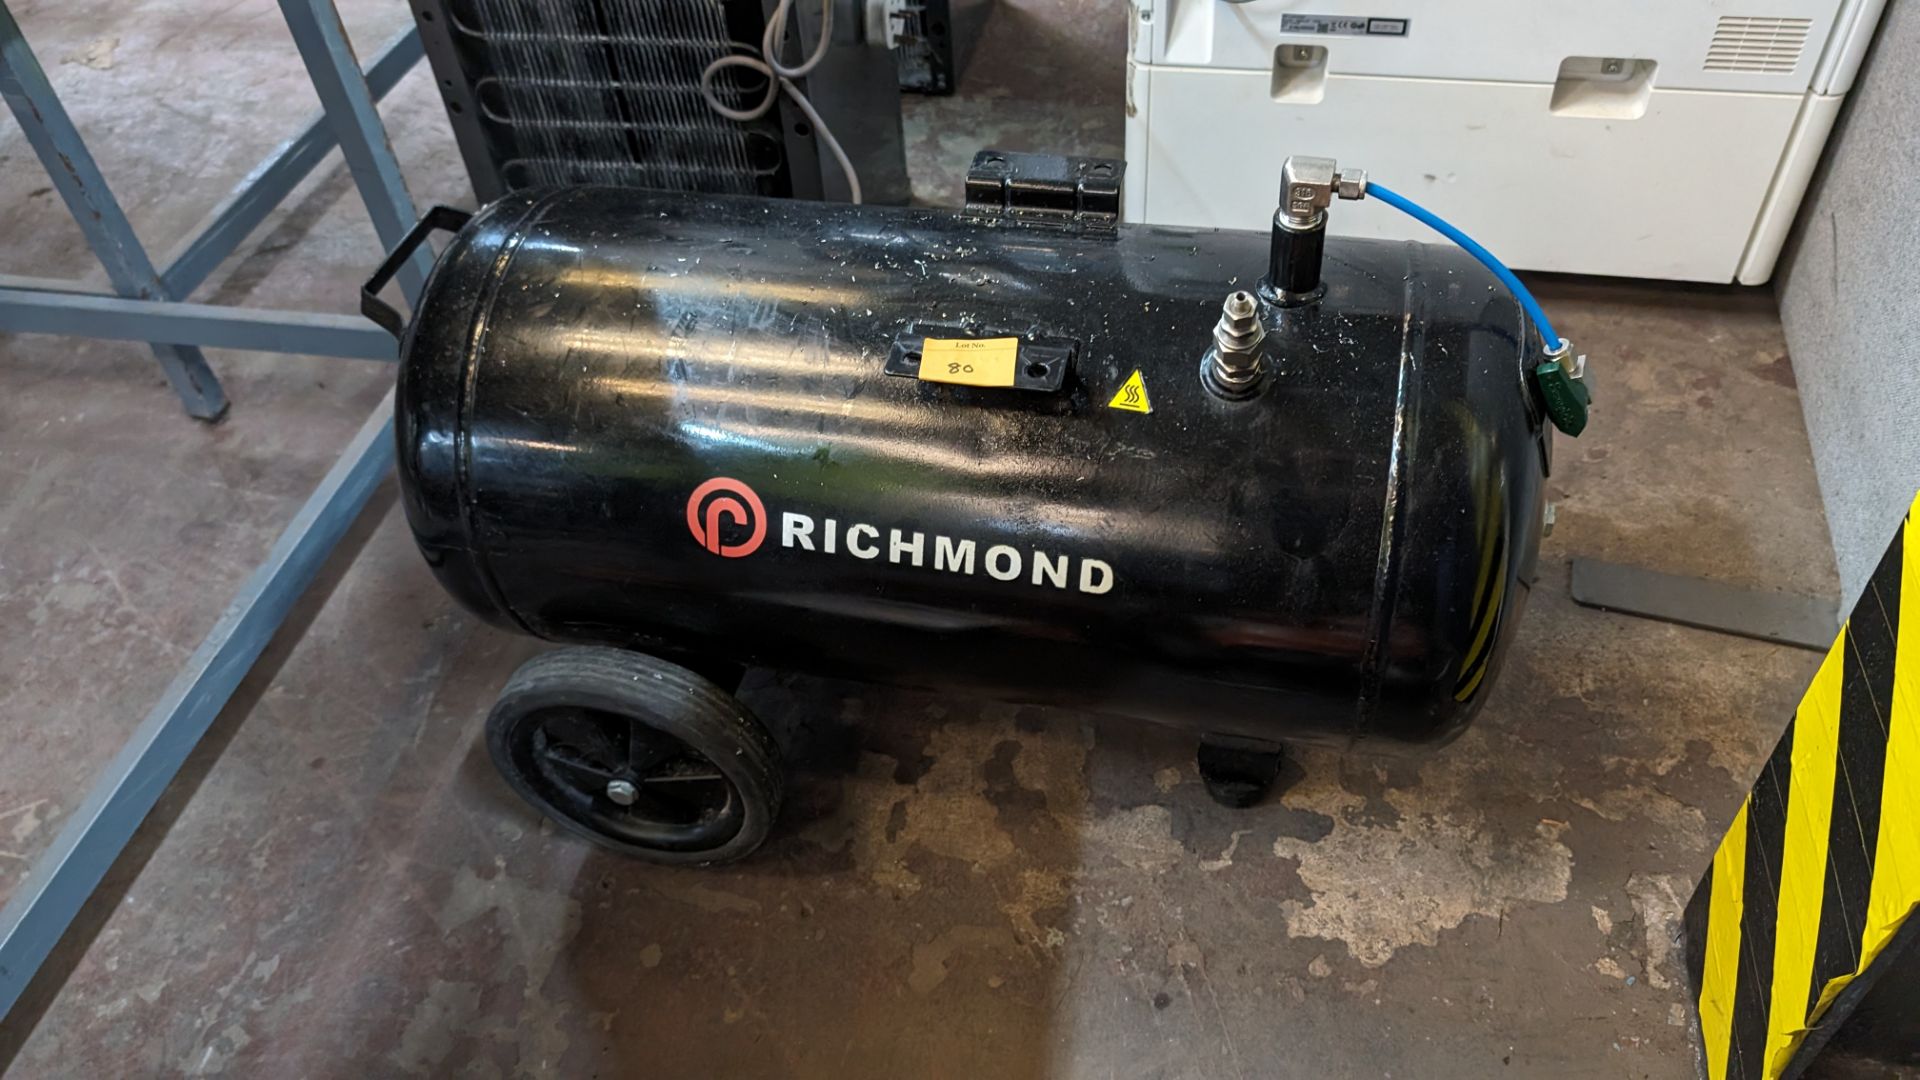 Richmond mobile welded air receiver - Image 3 of 6